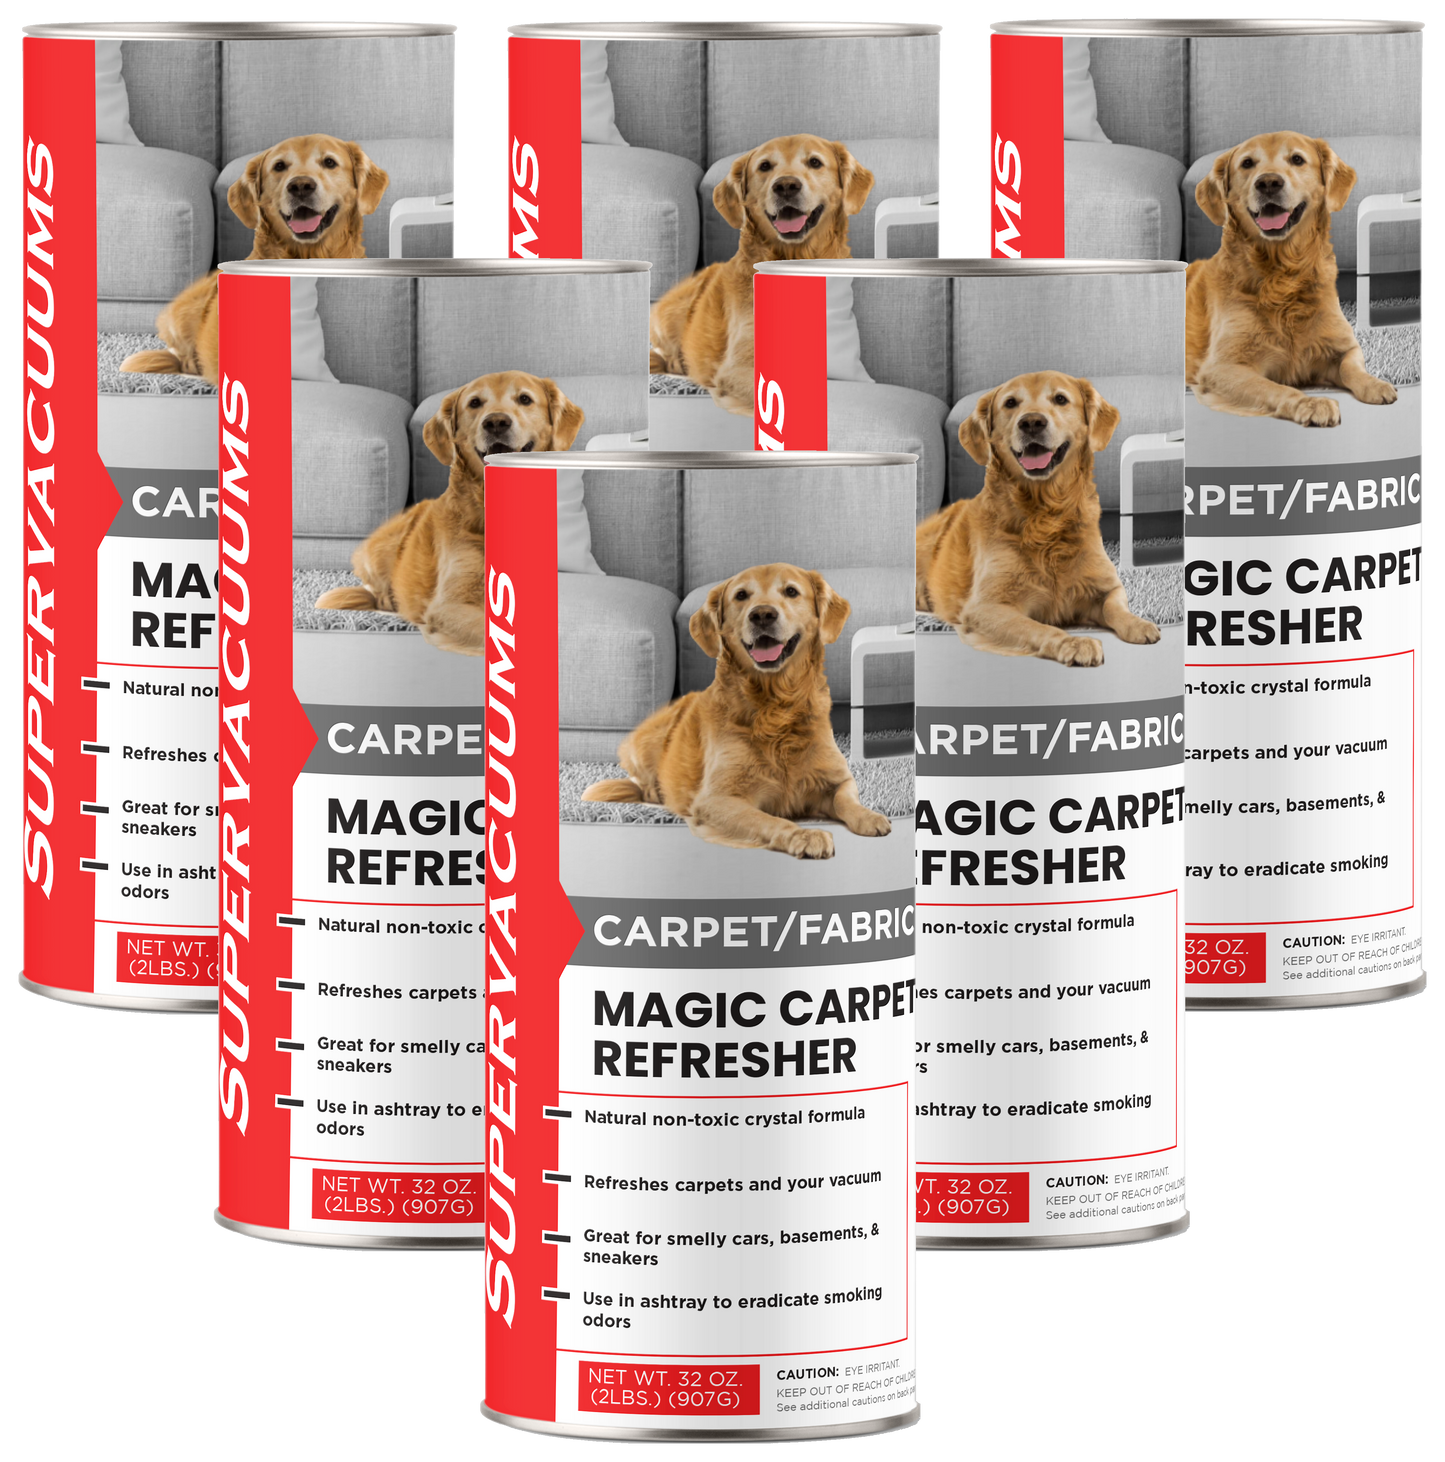 Supervacuums Magic Carpet Refresher for Carpet and Fabric